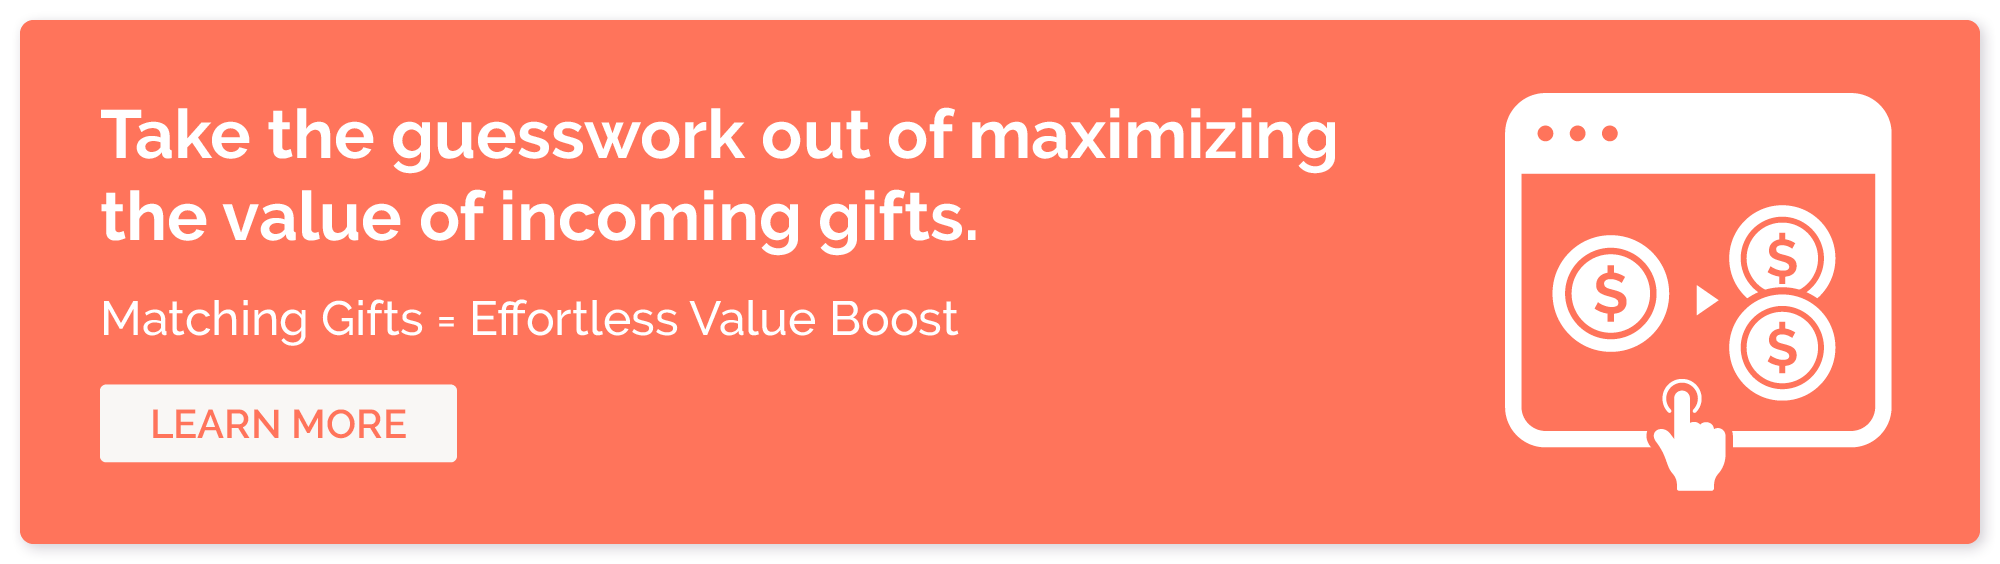 Learn more about matching gifts and how they grow your nonprofit's revenue.